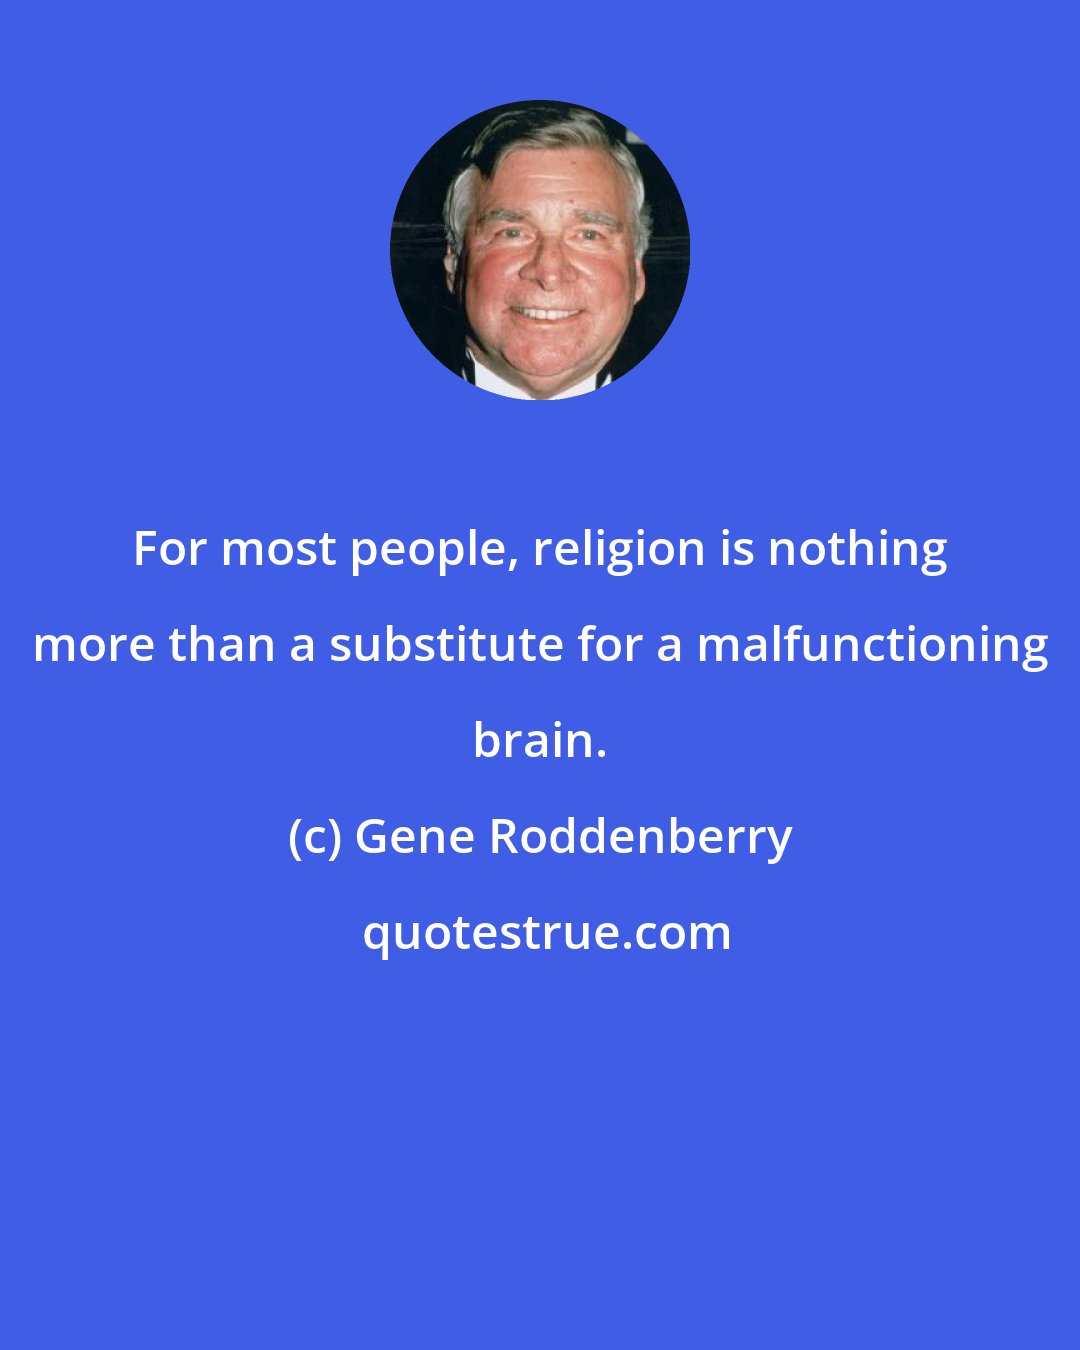 Gene Roddenberry: For most people, religion is nothing more than a substitute for a malfunctioning brain.